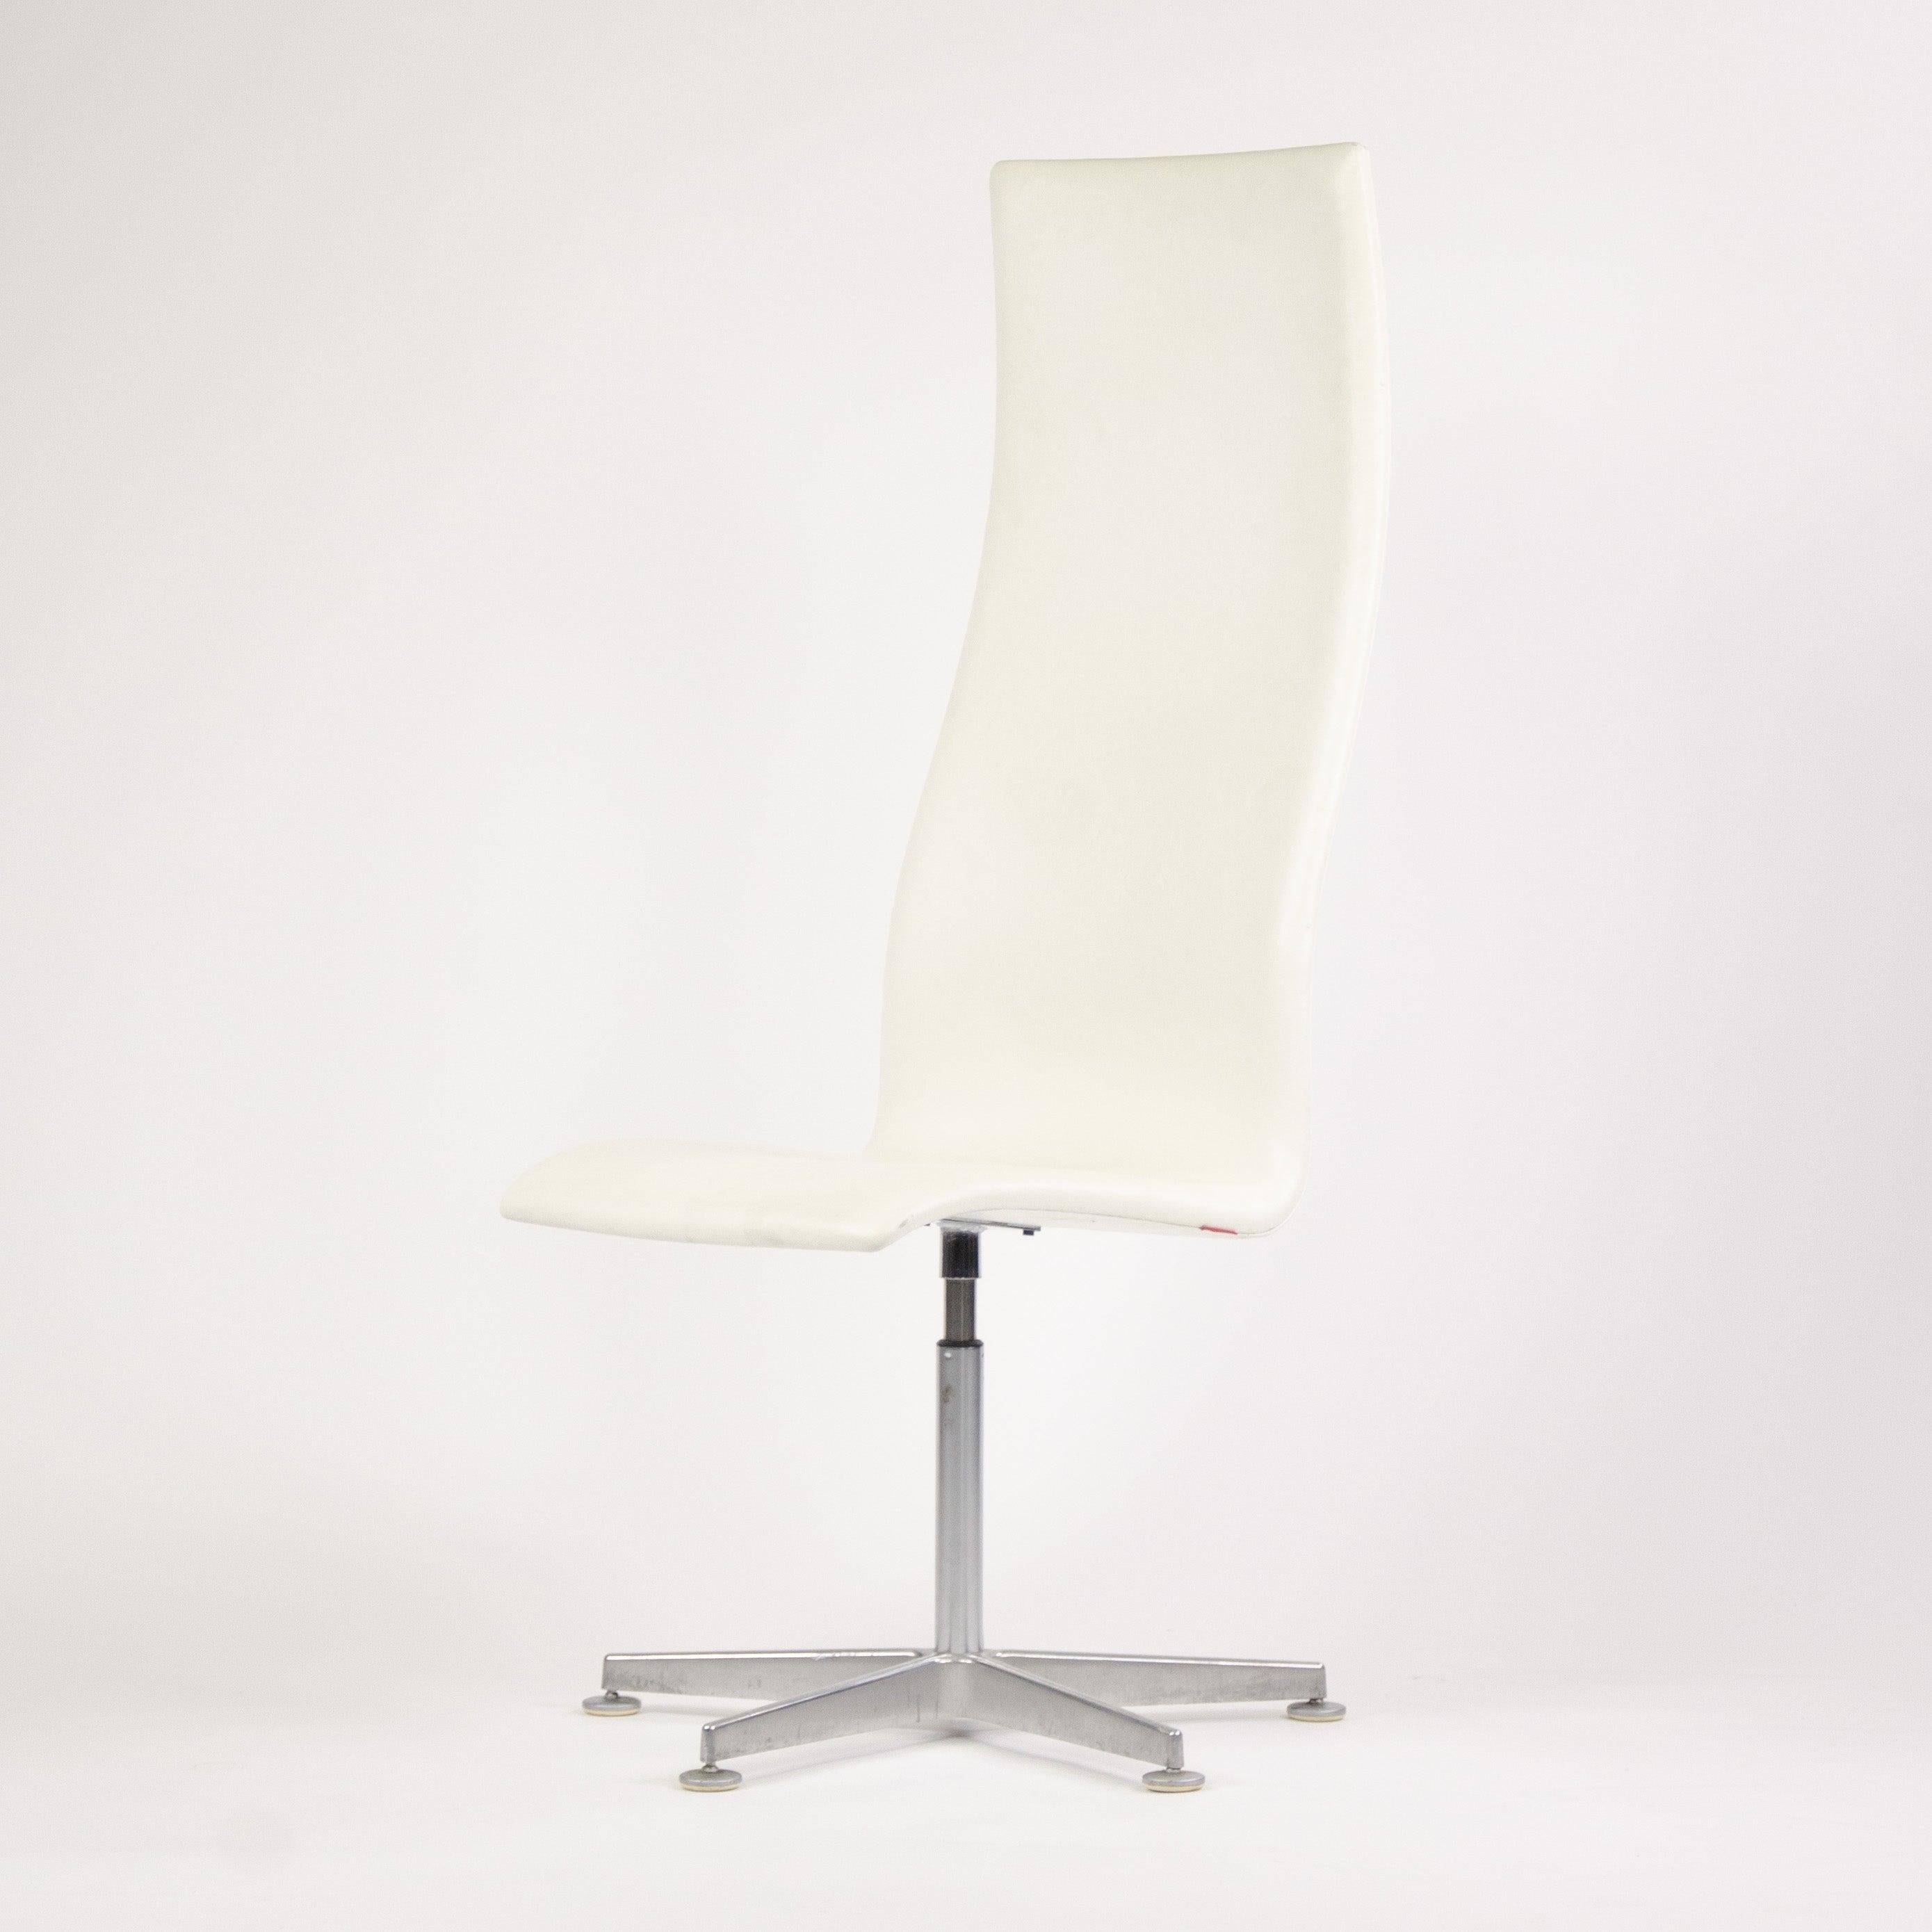 Modern Fritz Hansen Arne Jacobsen Tall Oxford Chair White Leather 2007 4x Available For Sale